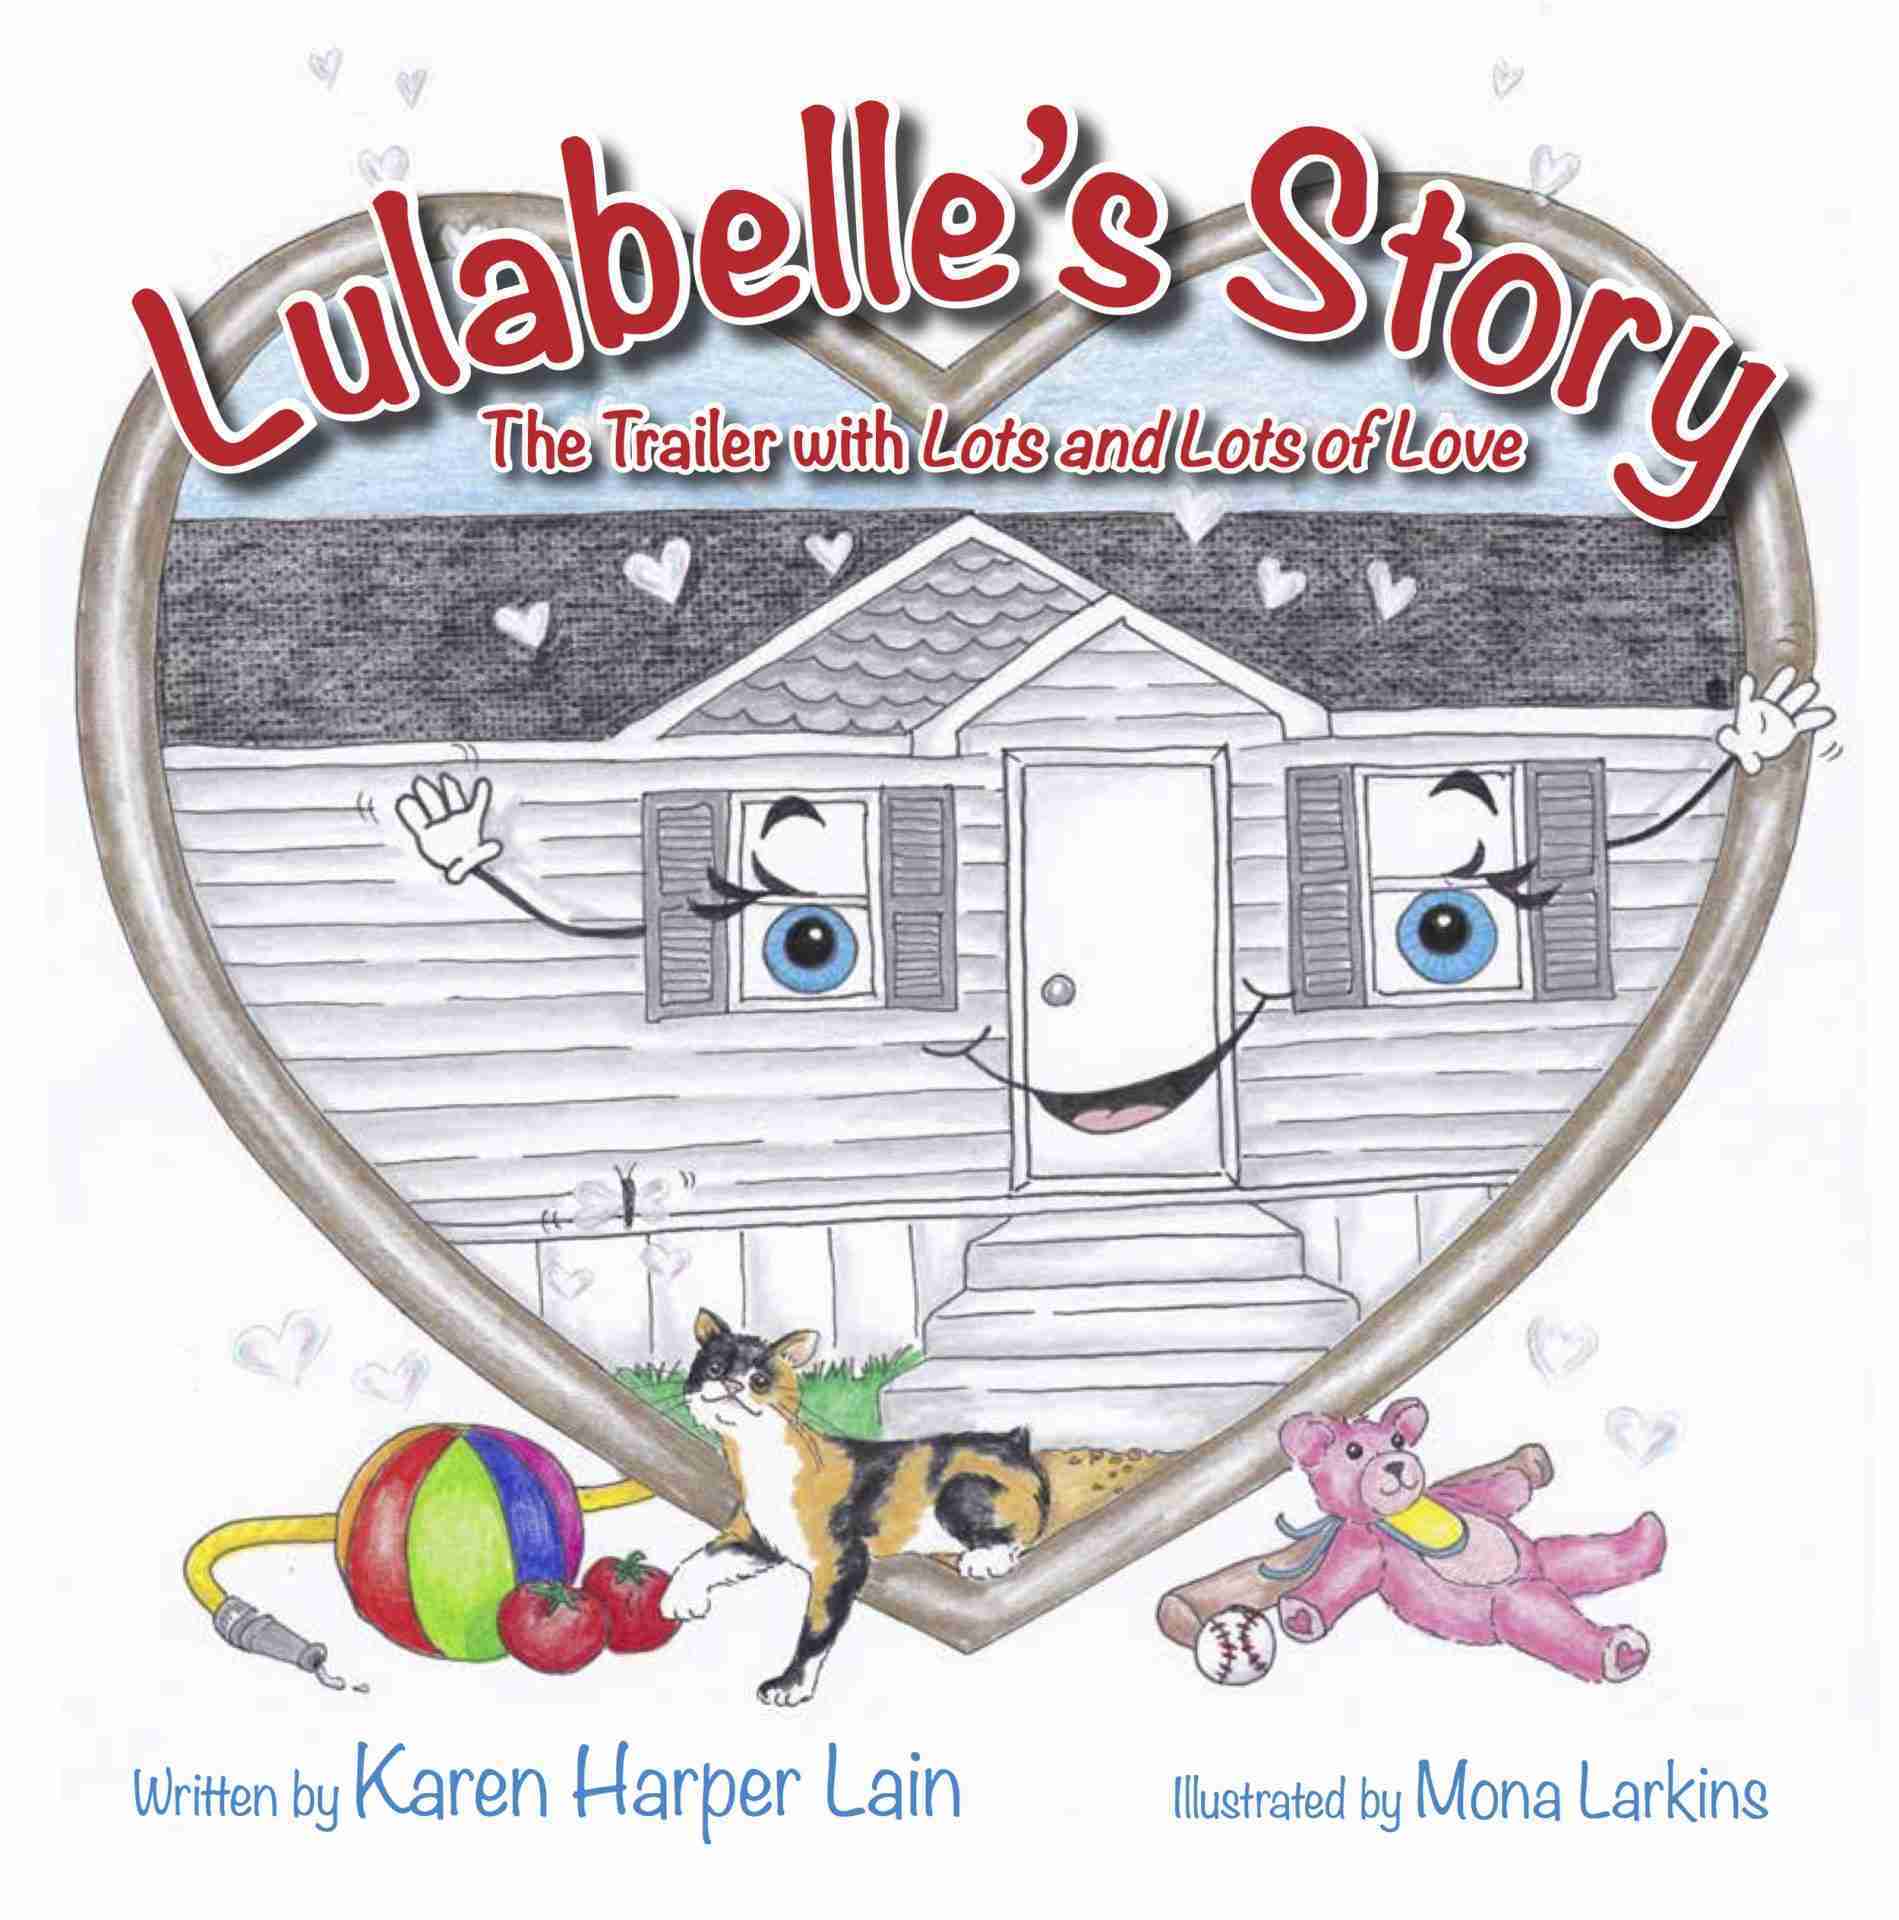 Lulabelle's story, the trailer with lots and lots of love